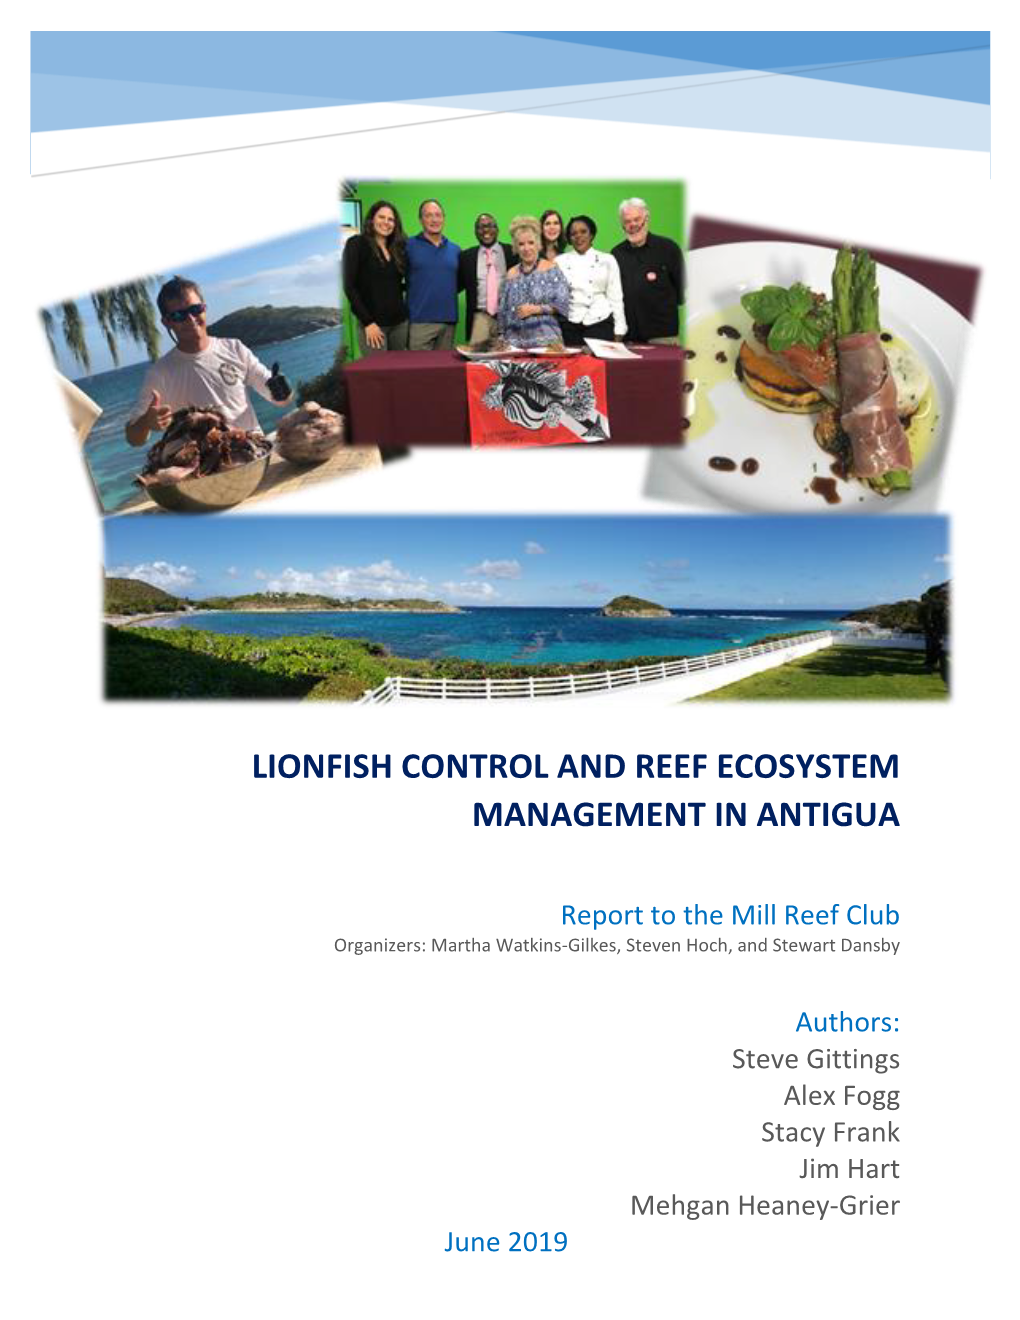 Lionfish Control and Reef Ecosystem Management in Antigua